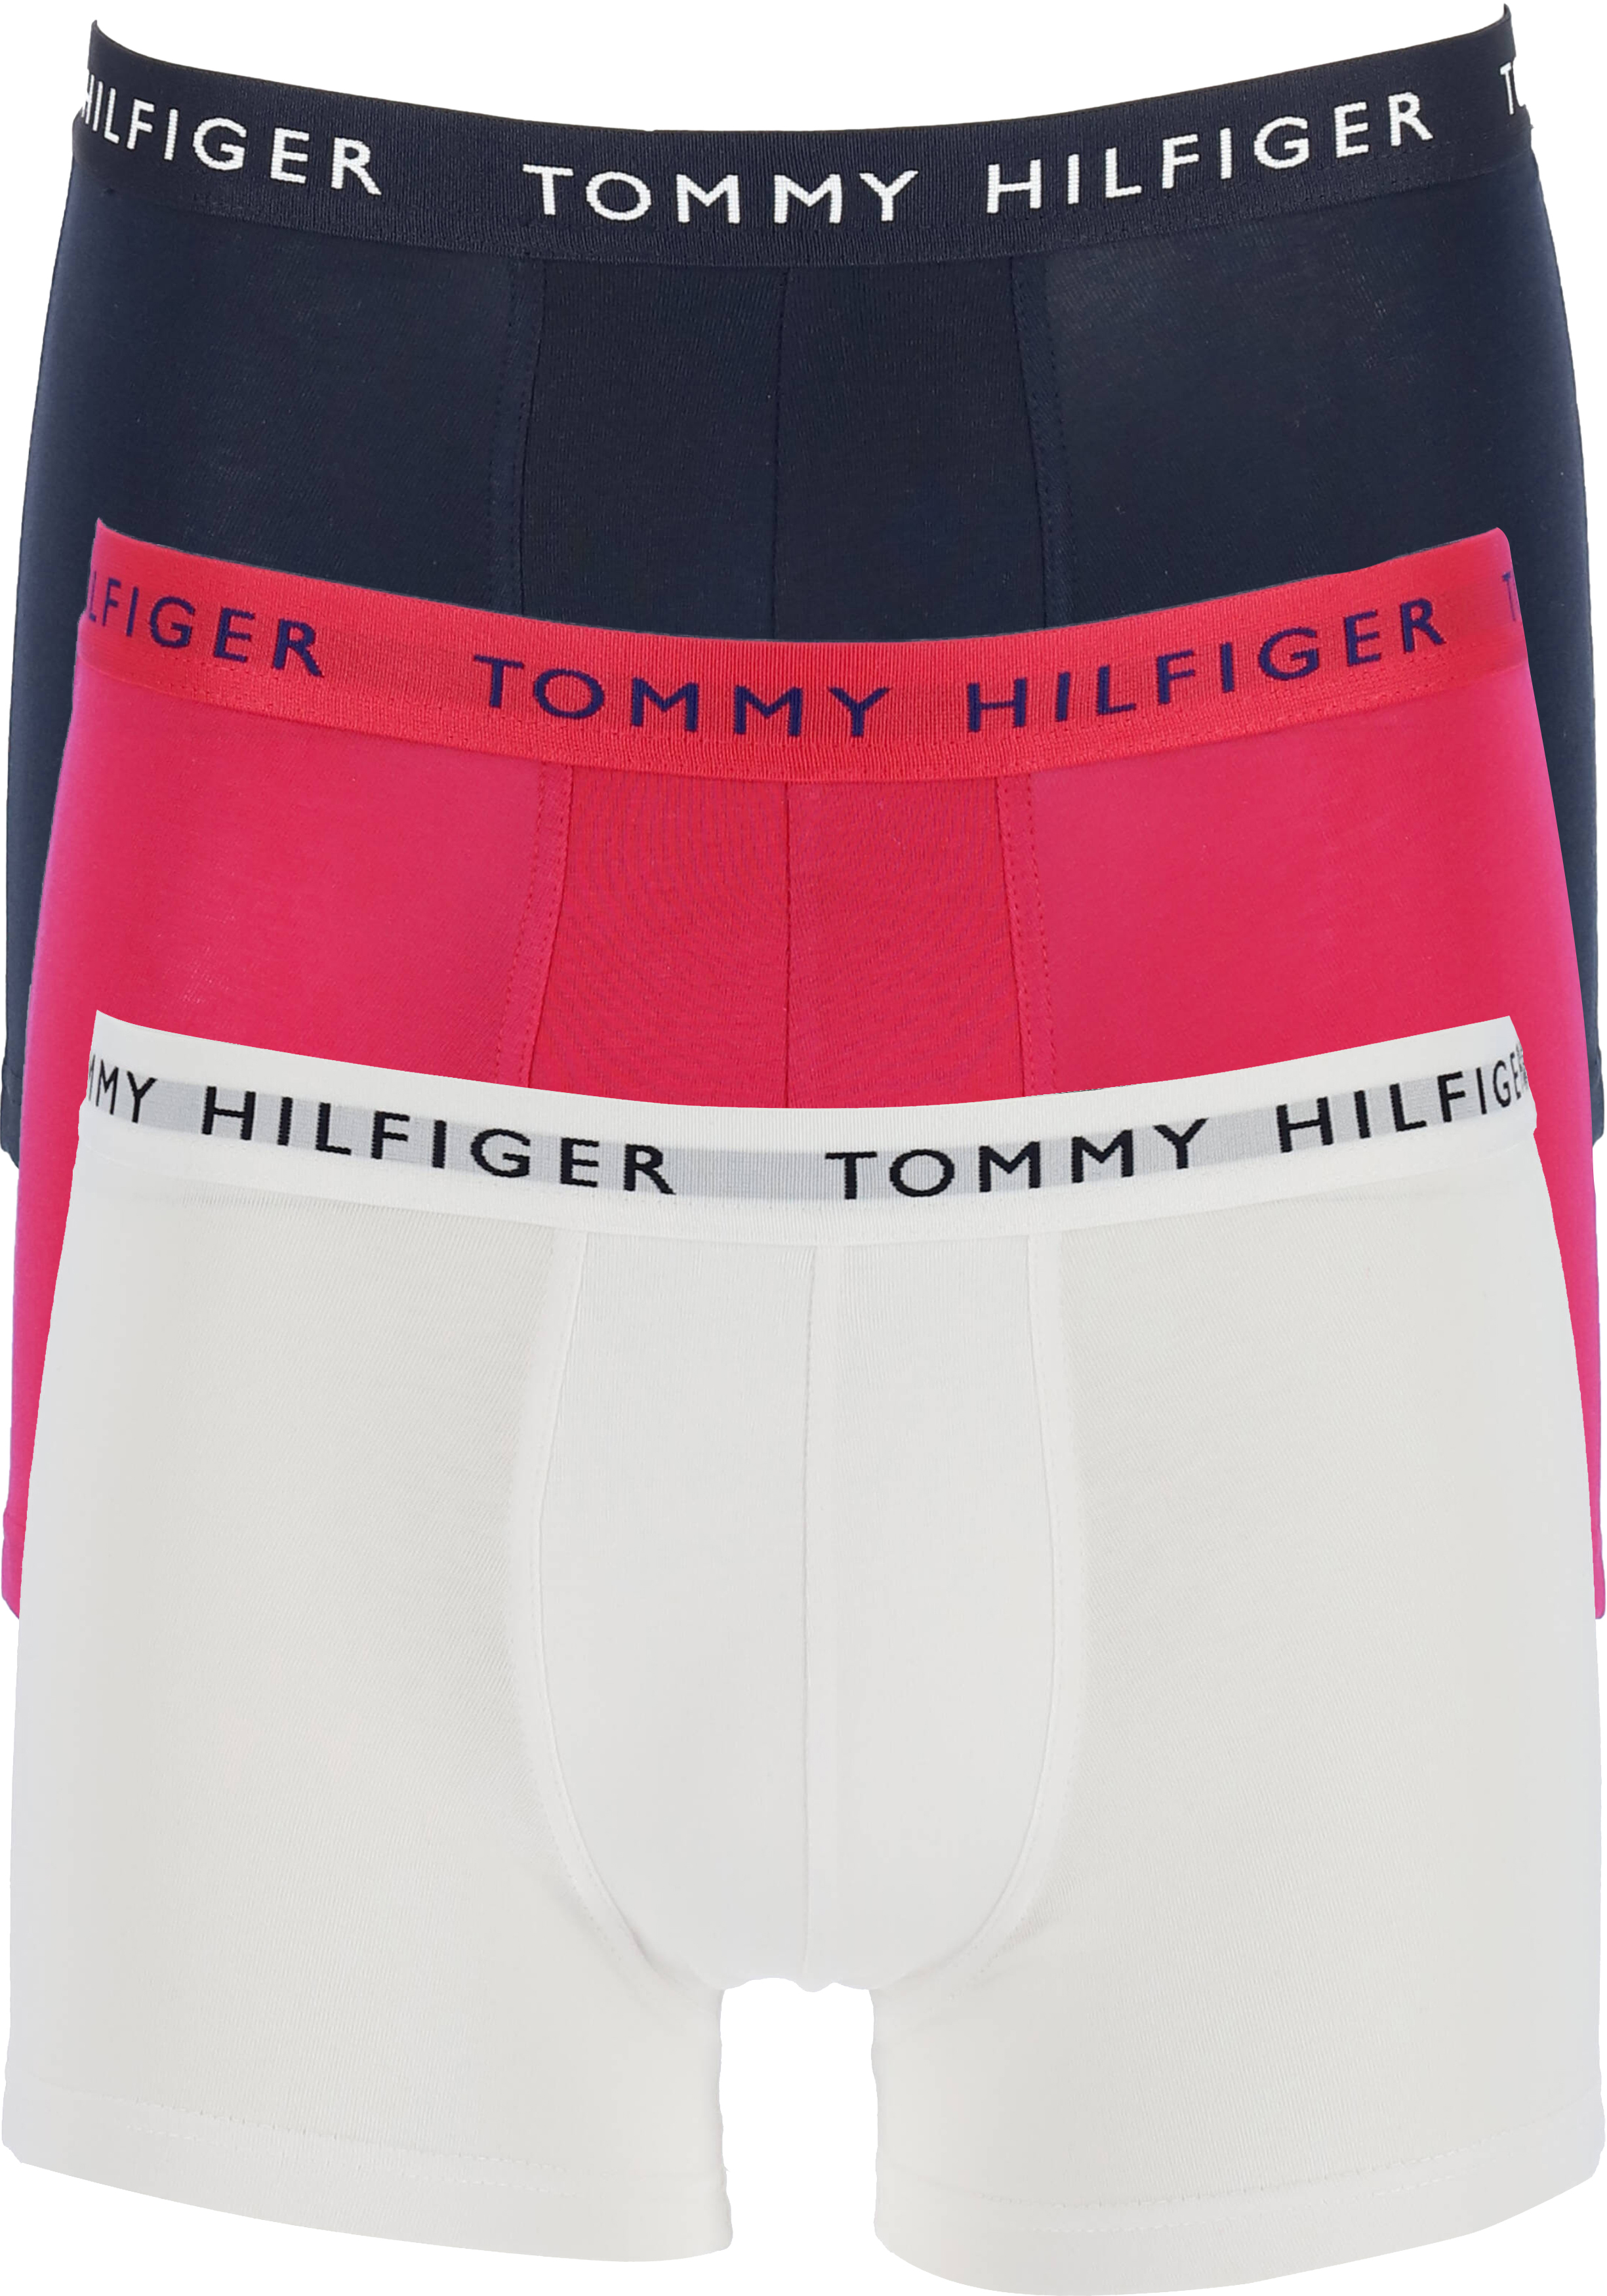 Tommy Hilfiger Recycled Essentials trunks (3-pack), wit, blauw en rood